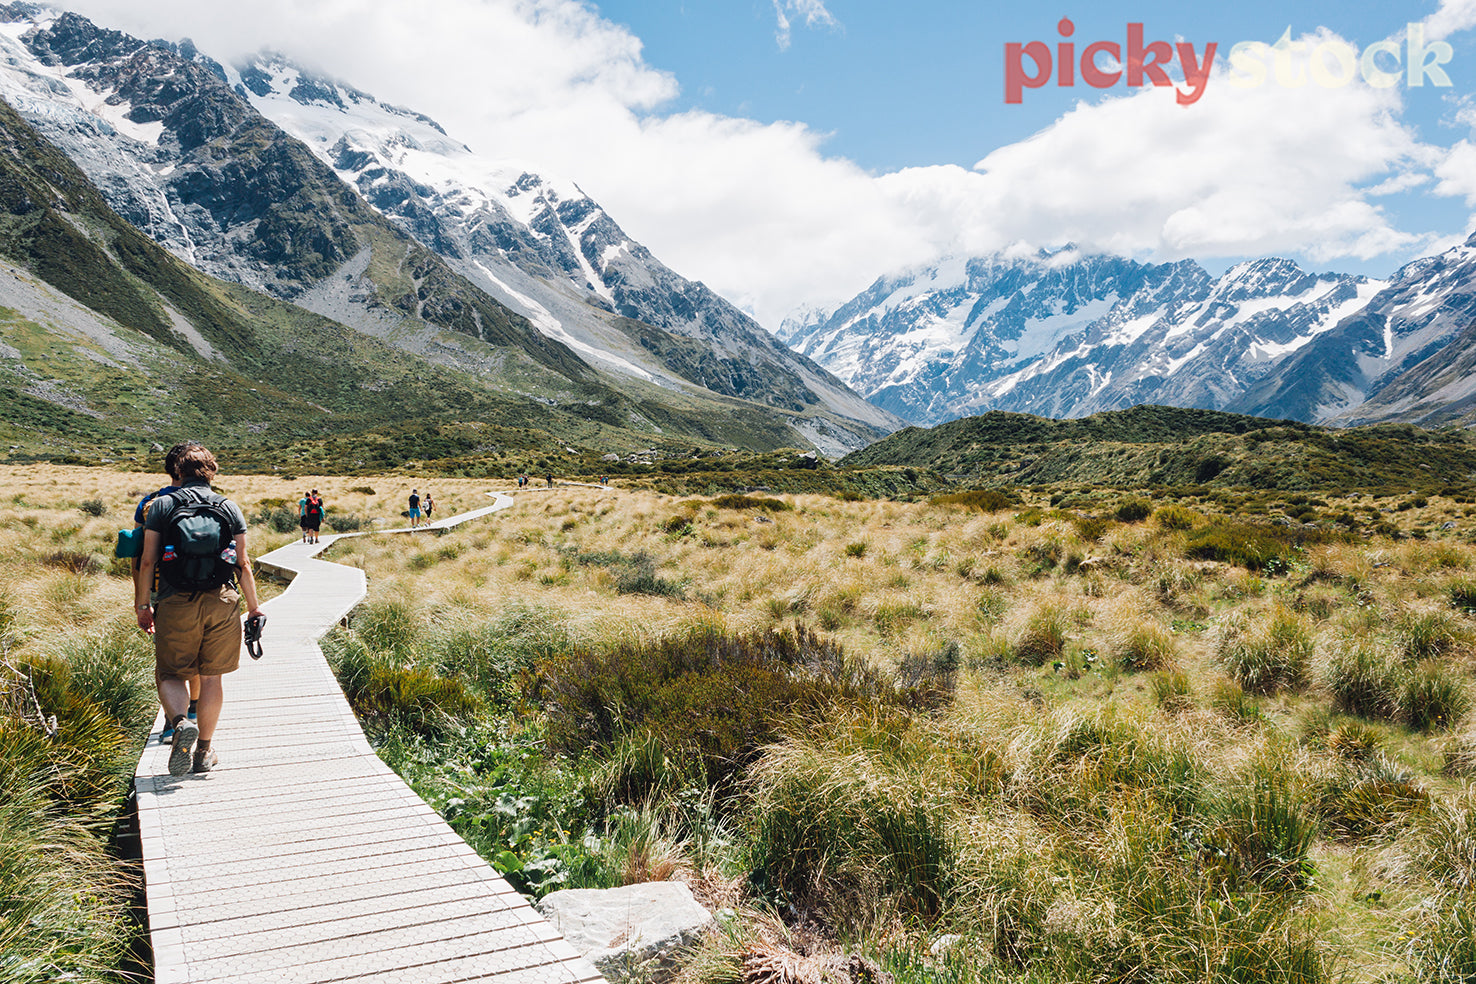 Trampers walk along a boardwalk, surrounded by snow capped mountains